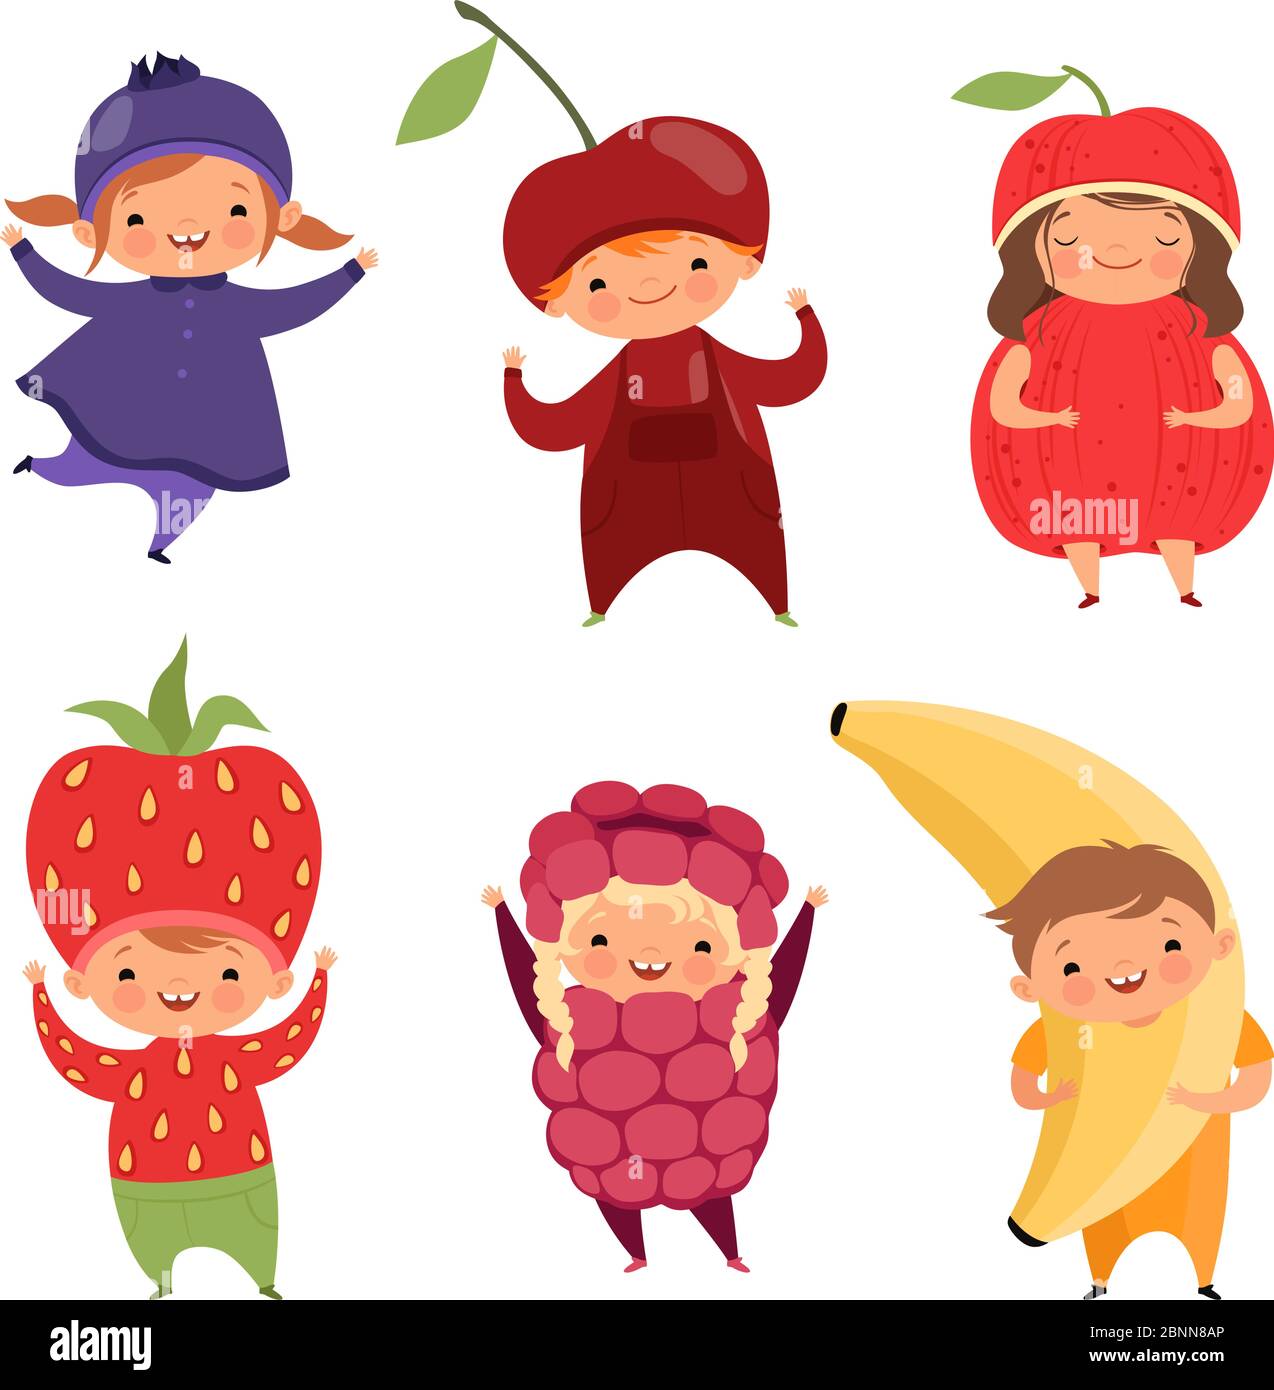 Fancy dress costumes Stock Vector Images - Alamy